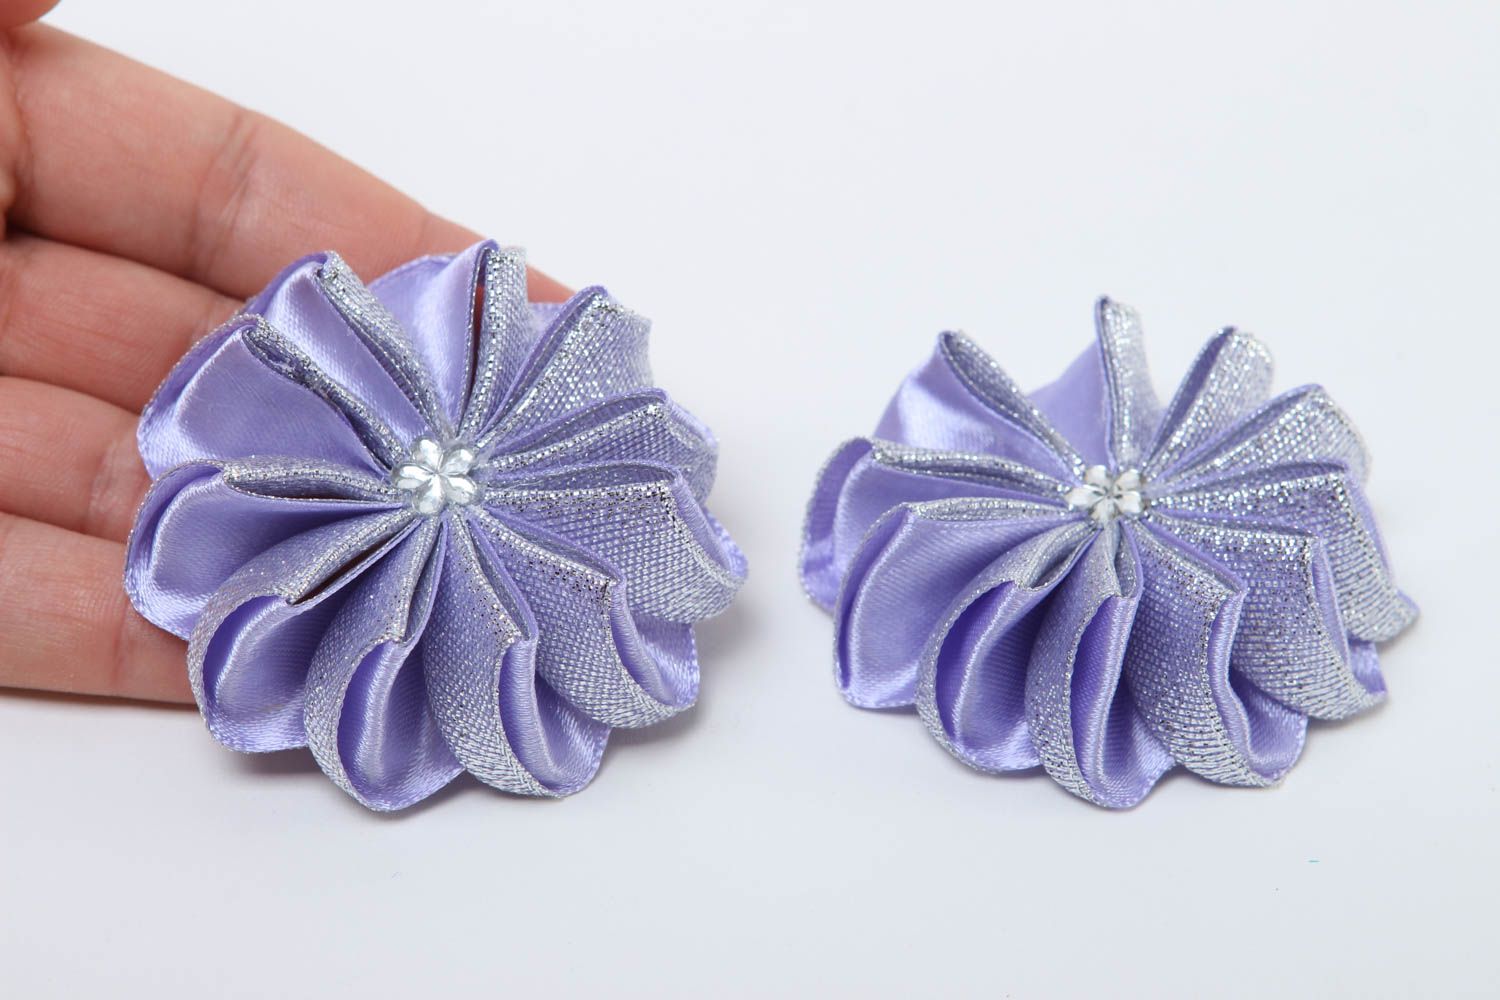 Satin ribbon flower fabric flowers kanzashi style flowers fittings for jewelry photo 5